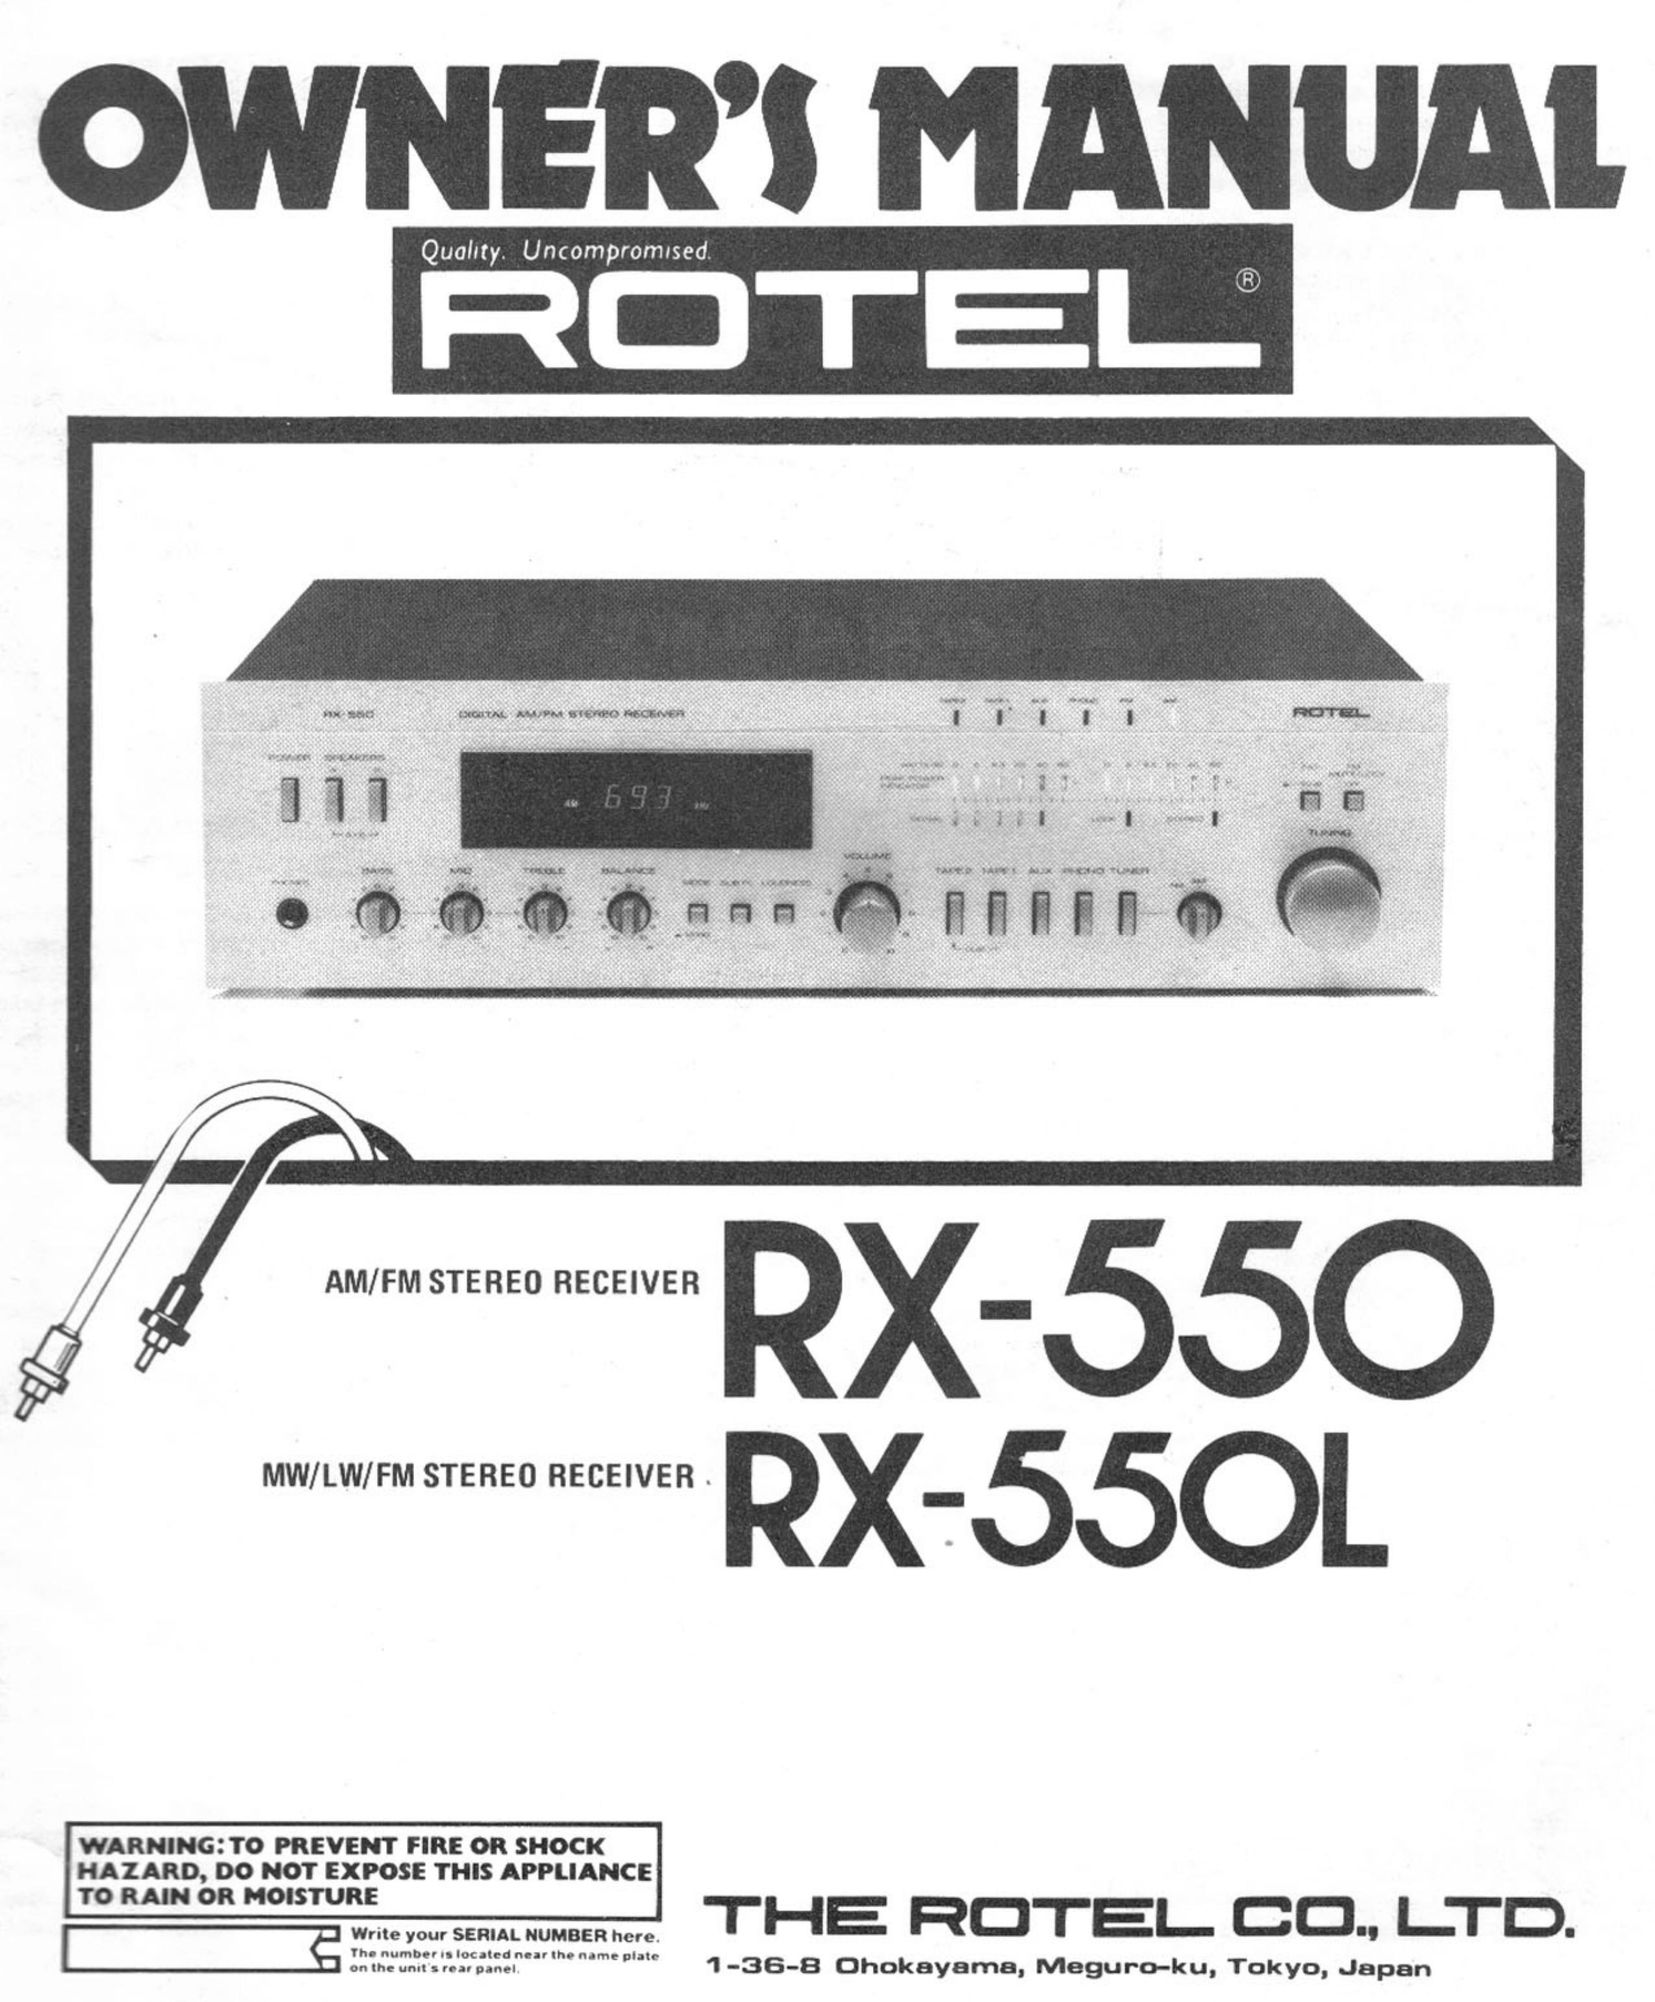 Rotel RX-550 Stereo Receiver User Manual